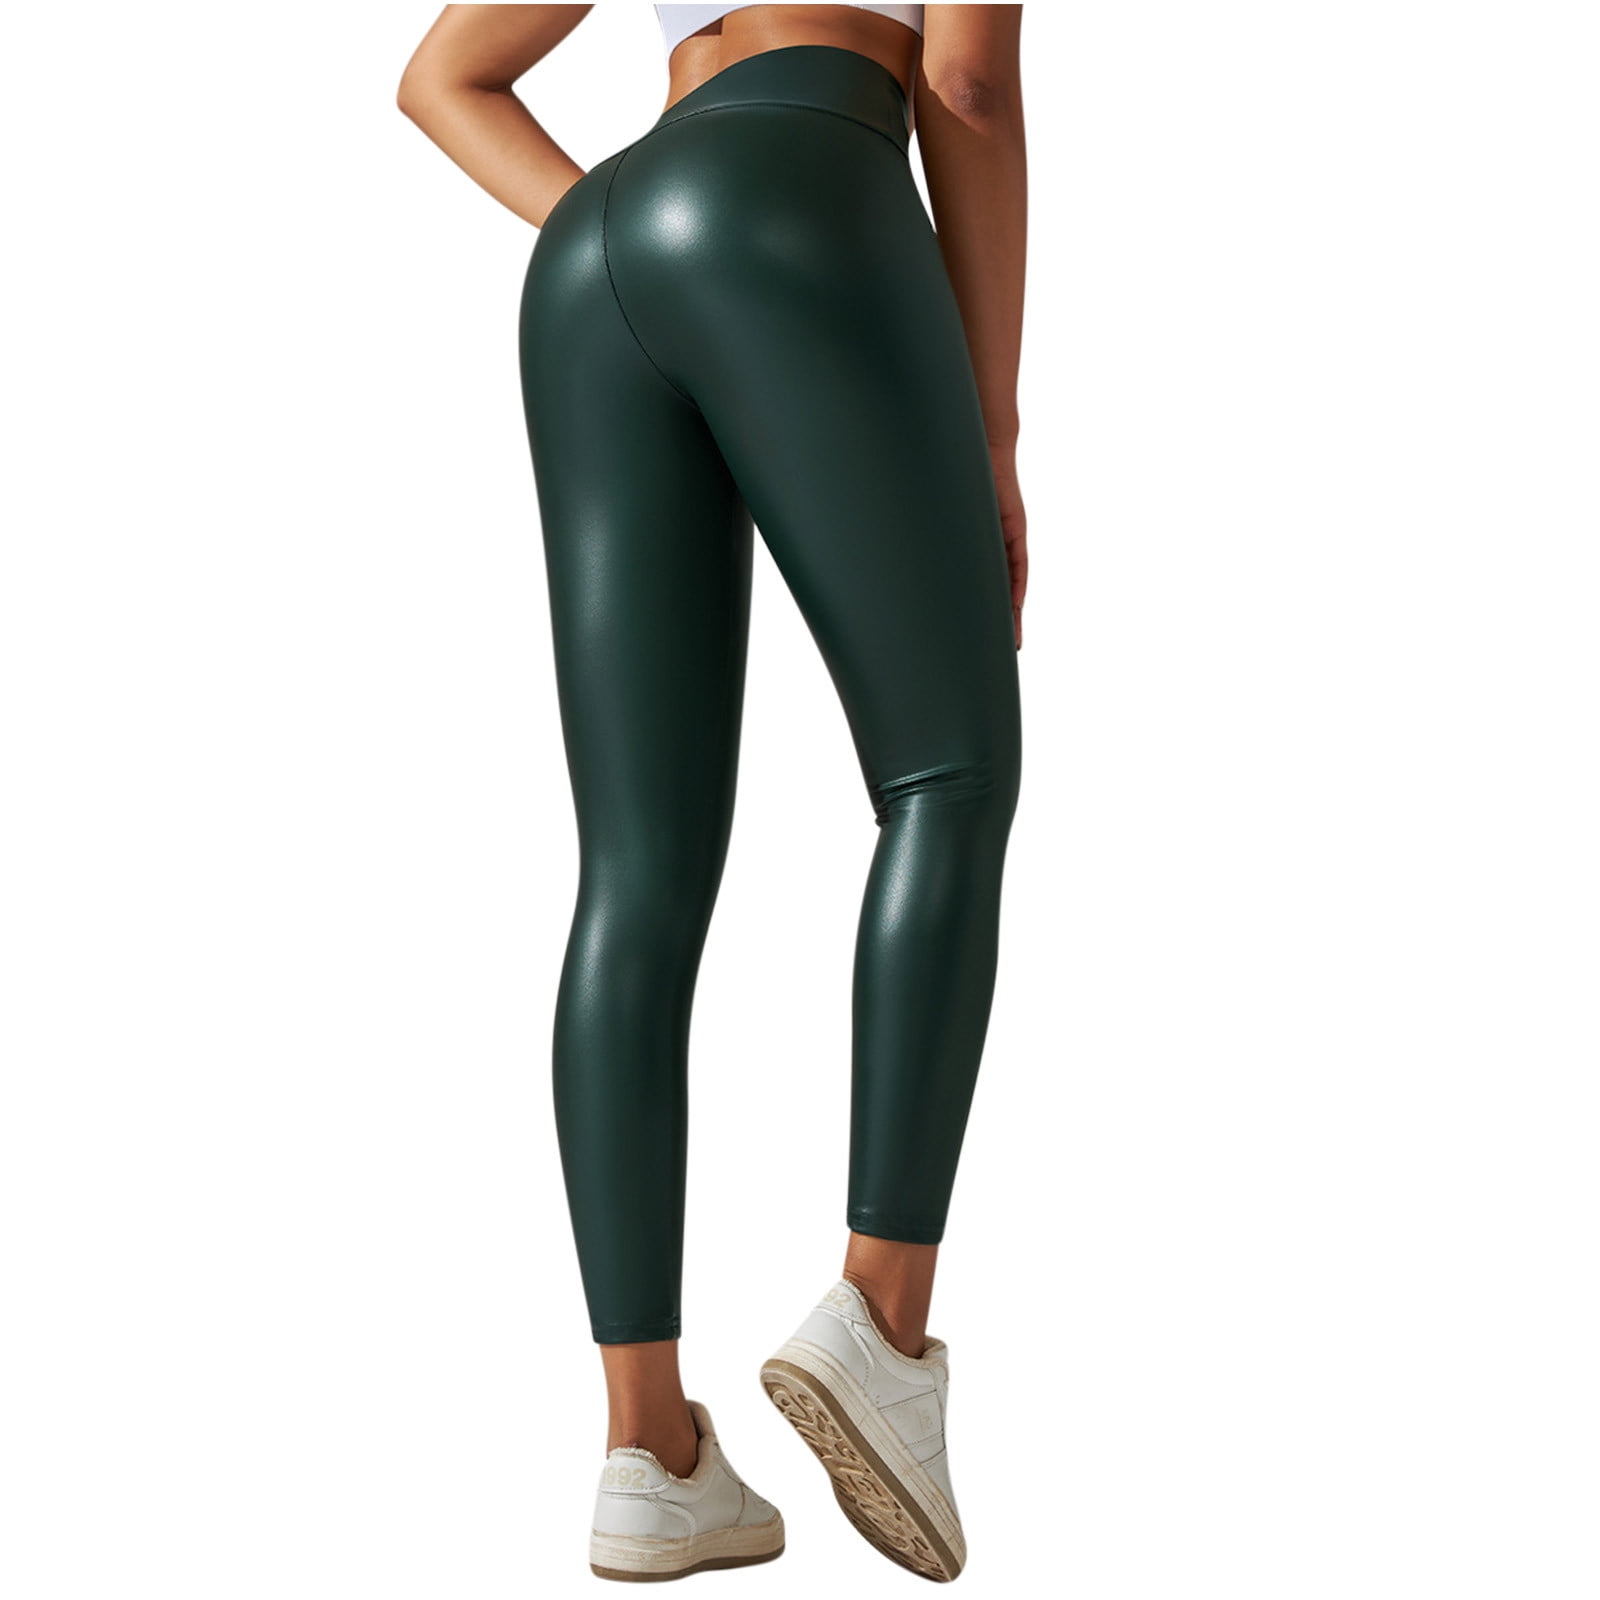 Jyeity Teacher Gifts, Sexy Leggings Plus Size Color Bottom Small Feet  Sports High Waist Thin Leather Pants Leggings For Women Plus Size Green  Size XL(US:10) 